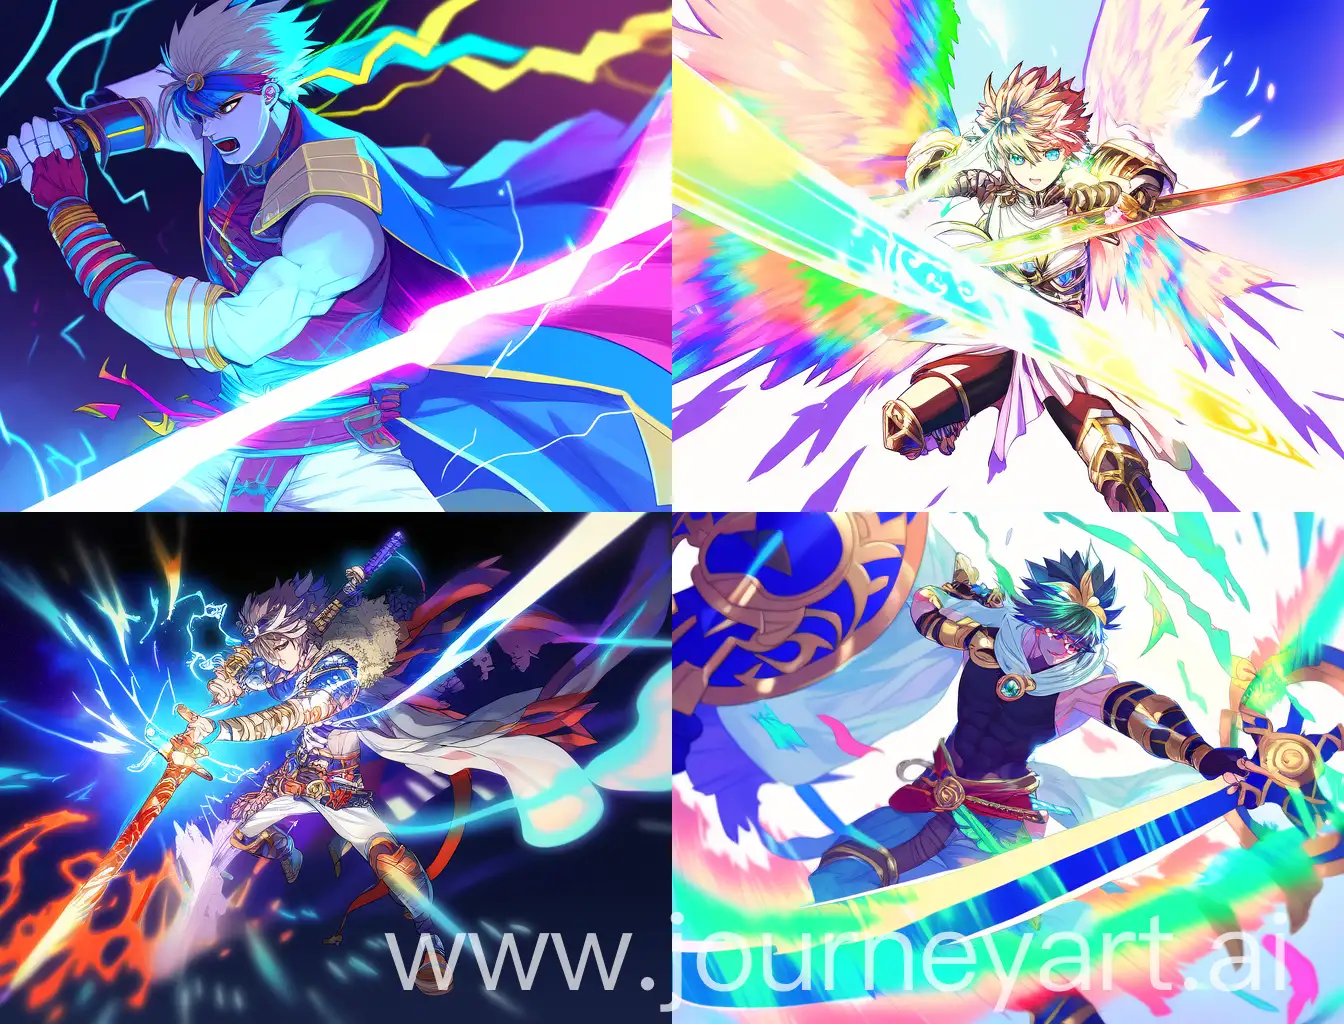 Anime-Art-of-a-Young-White-Male-Inspired-by-Horus-with-Rainbow-Aura-and-Sword